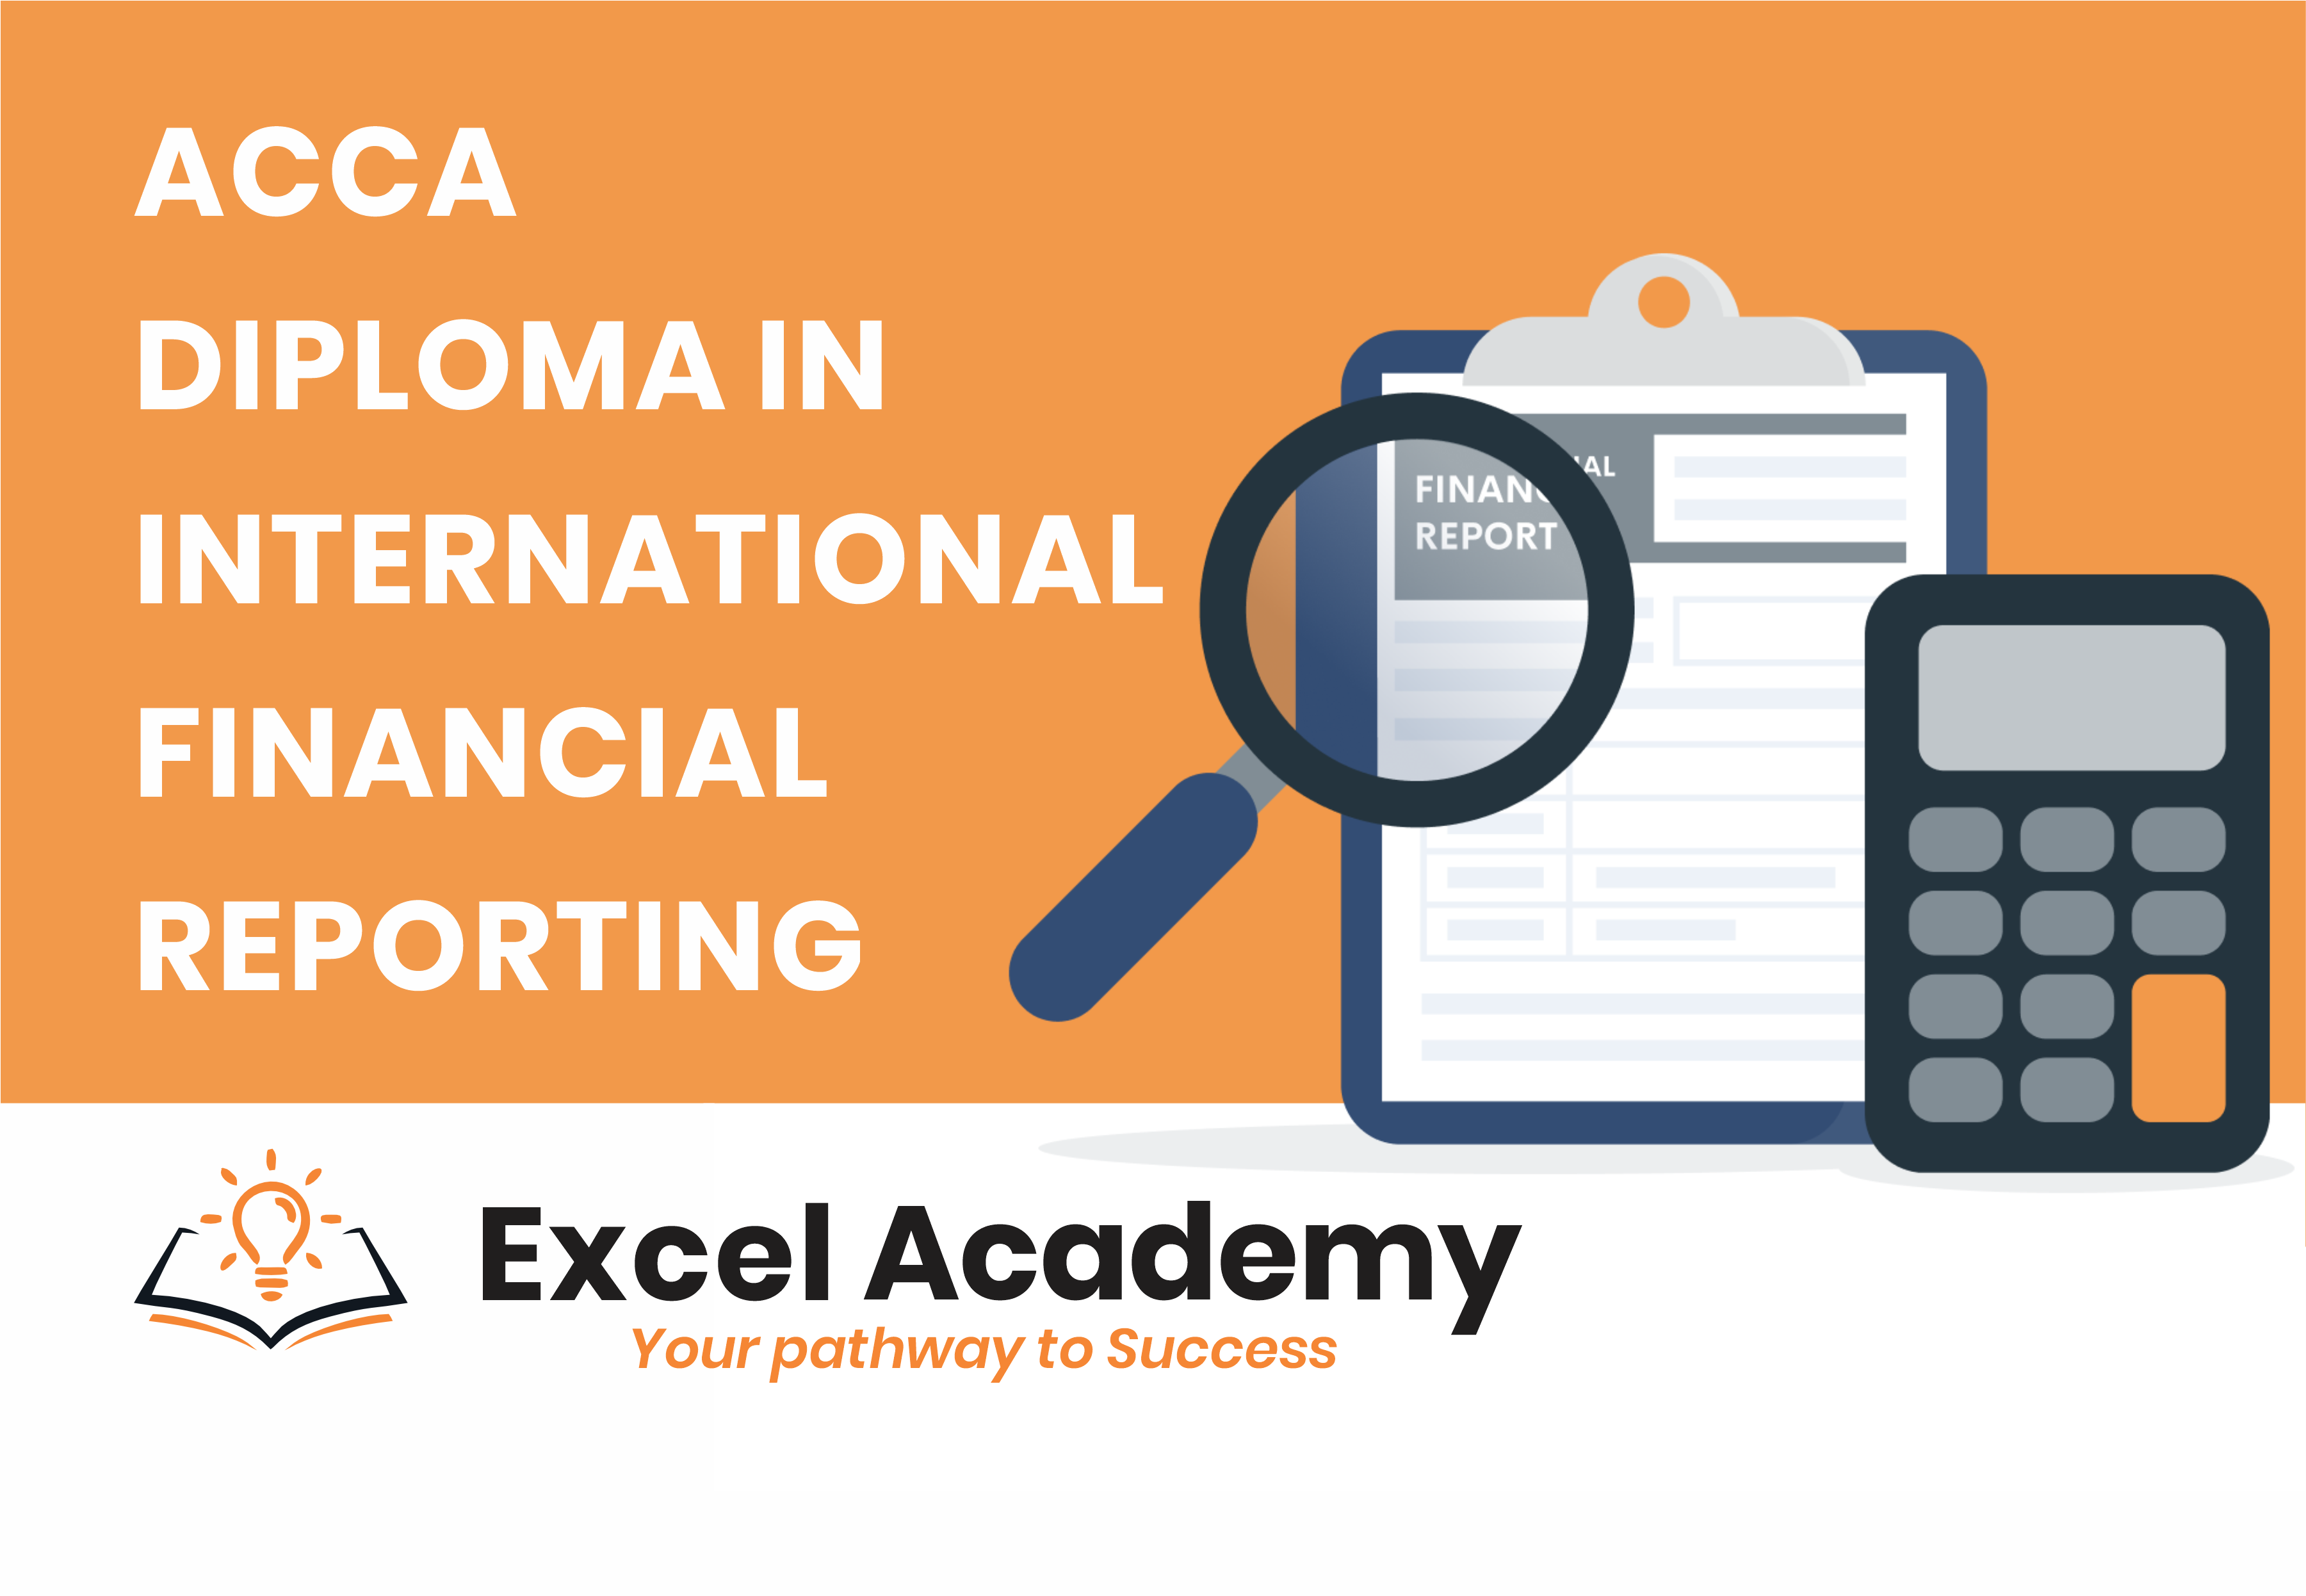 ACCA – Diploma in International Financial Reporting